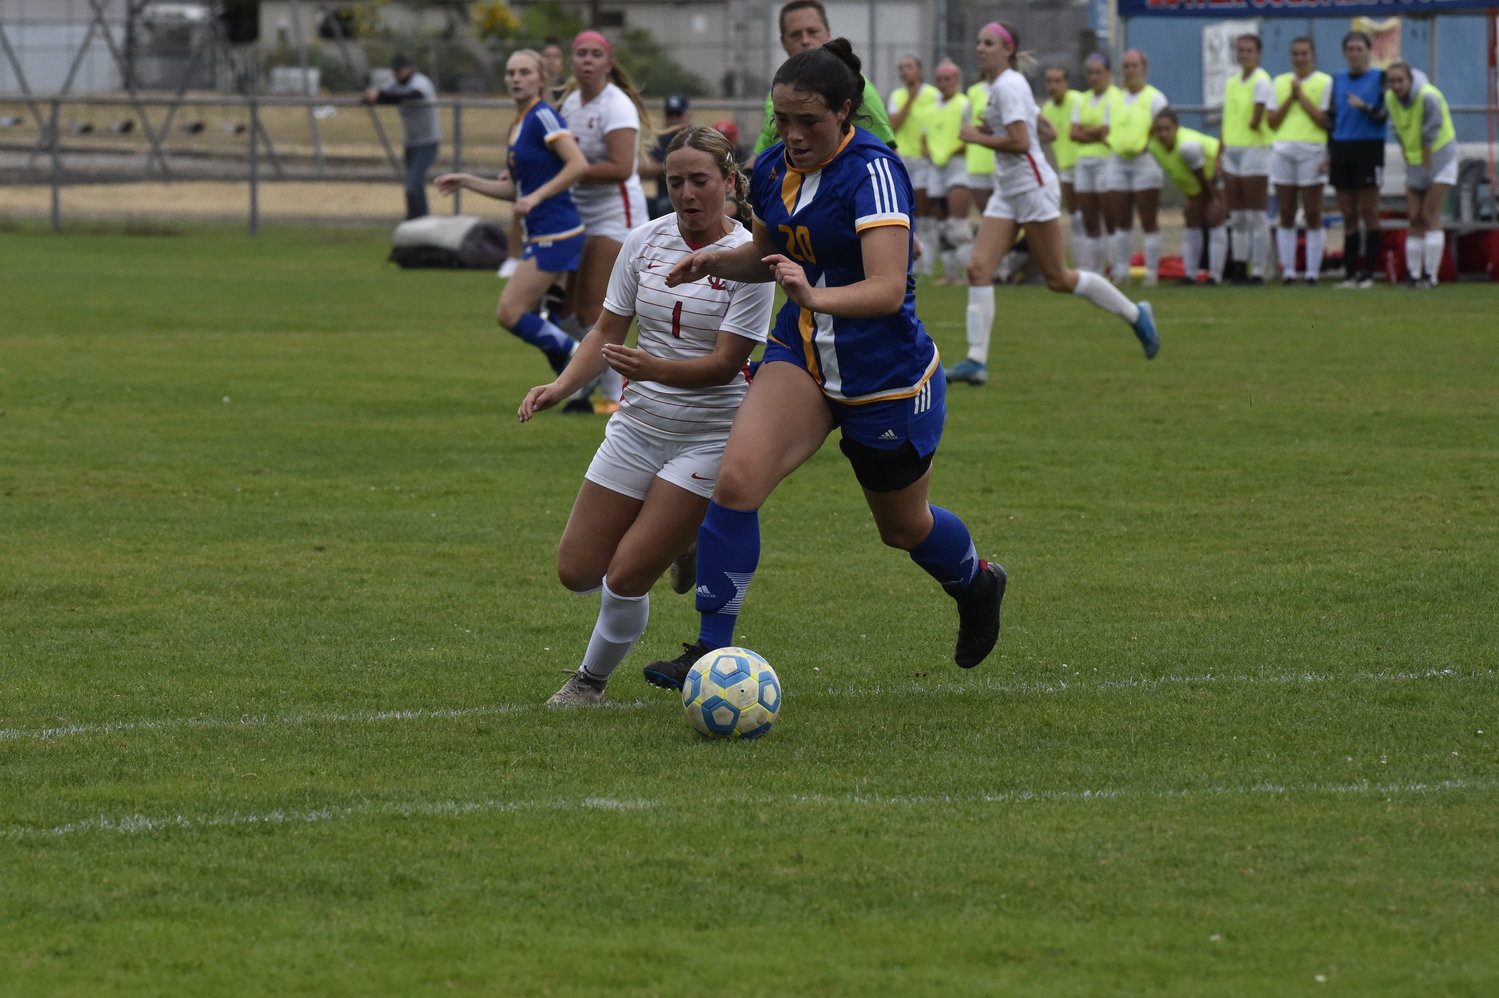 Centralia College wing Bailey Root dribbles upfield against Lower Columbia in Longview Sept. 28.